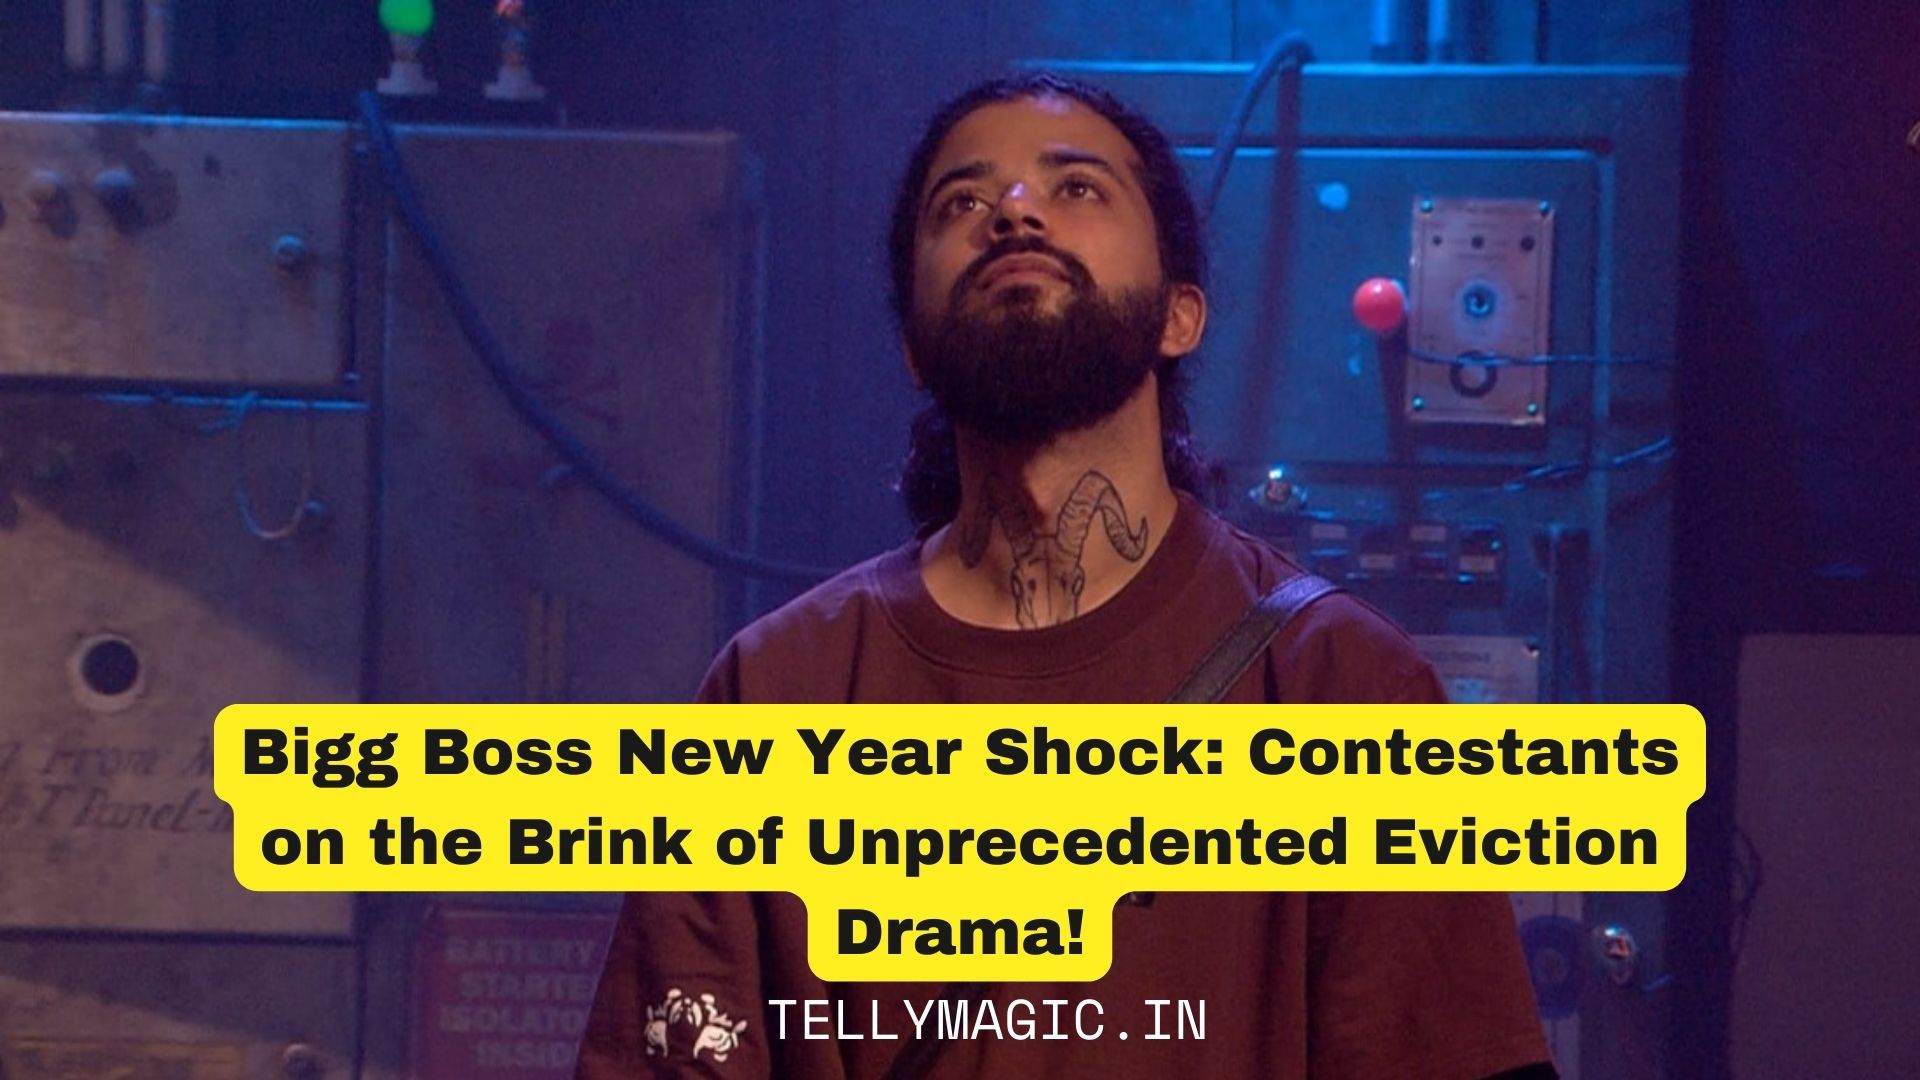 Bigg Boss New Year Shock: Contestants on the Brink of Unprecedented Eviction Drama!